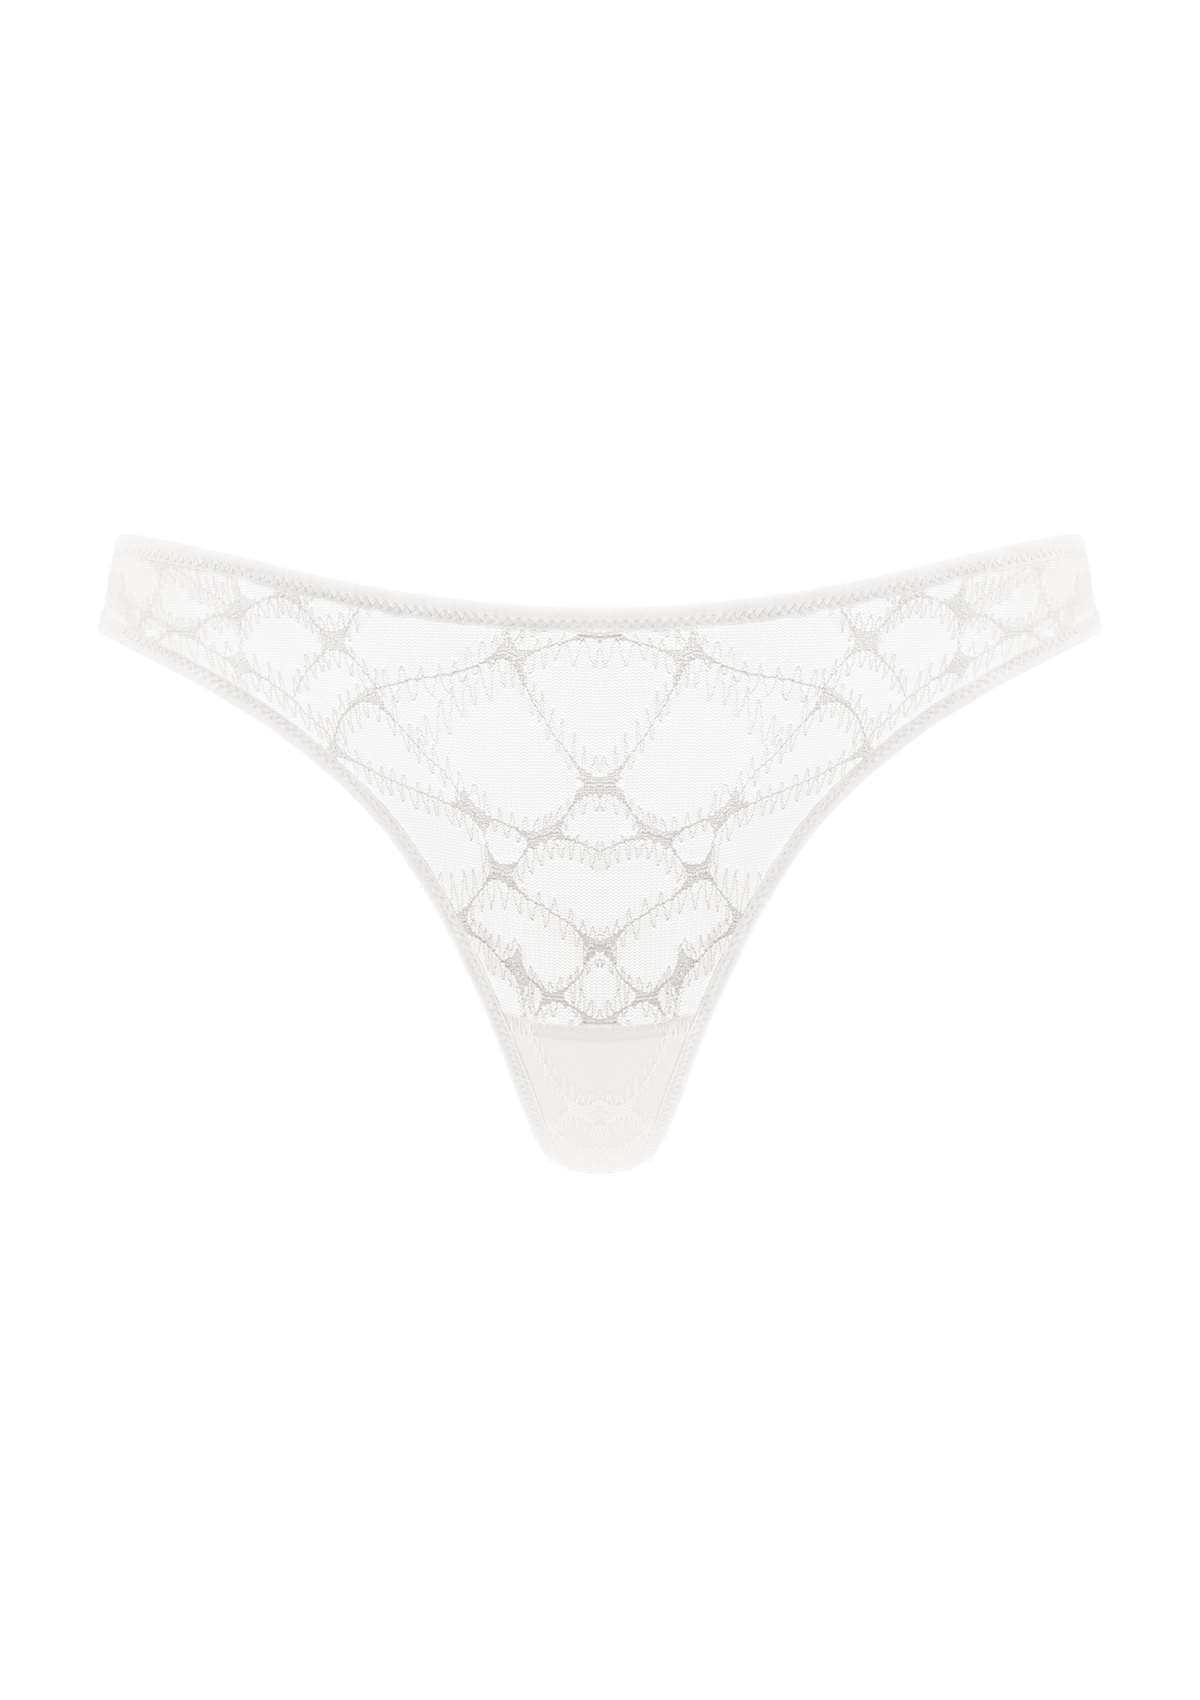 HSIA Soft Sexy Mesh Thong Underwear 3 Pack - XL / Black+White+Light Coral